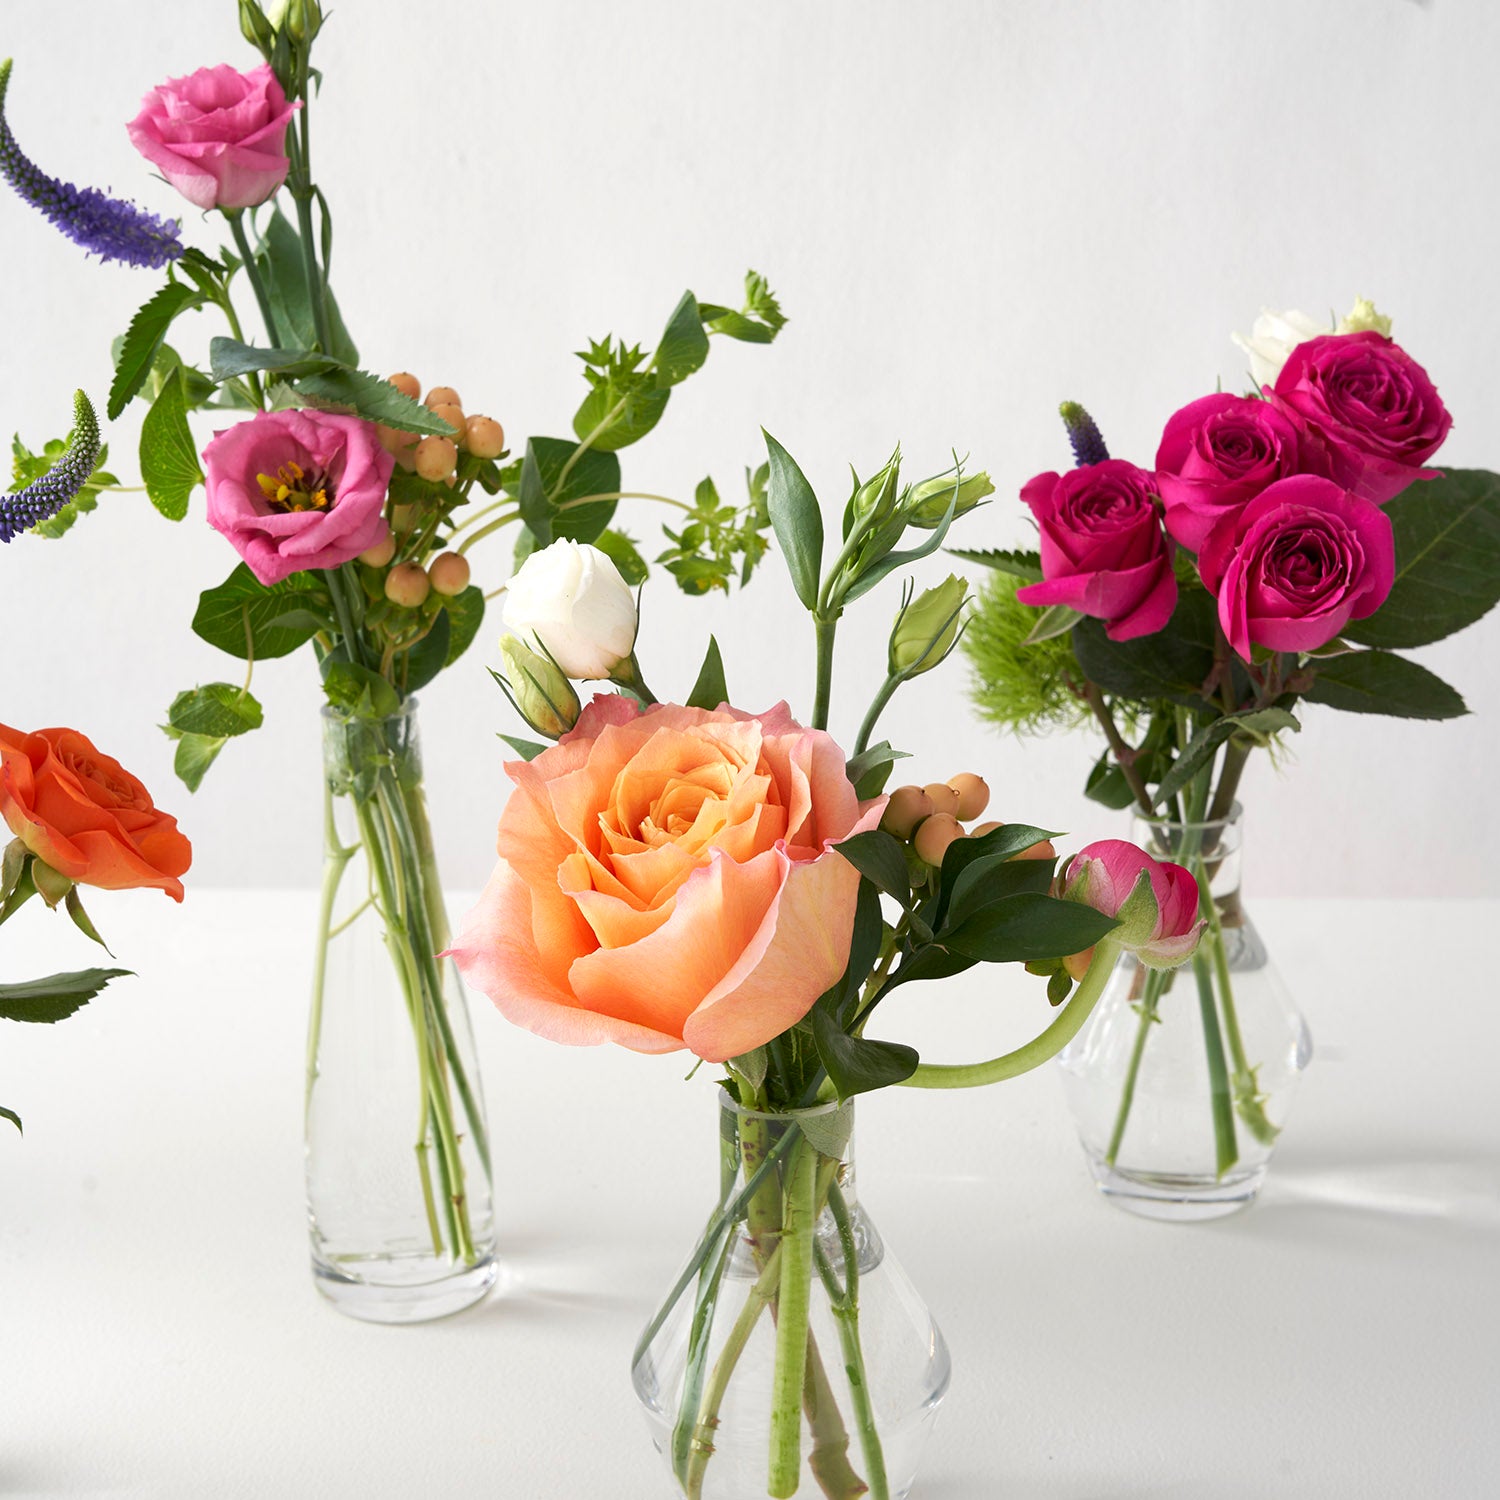 Closeup of three small glass vases with pink purple and orange flowers on white background. Center vase contains large orange freespirit rose.